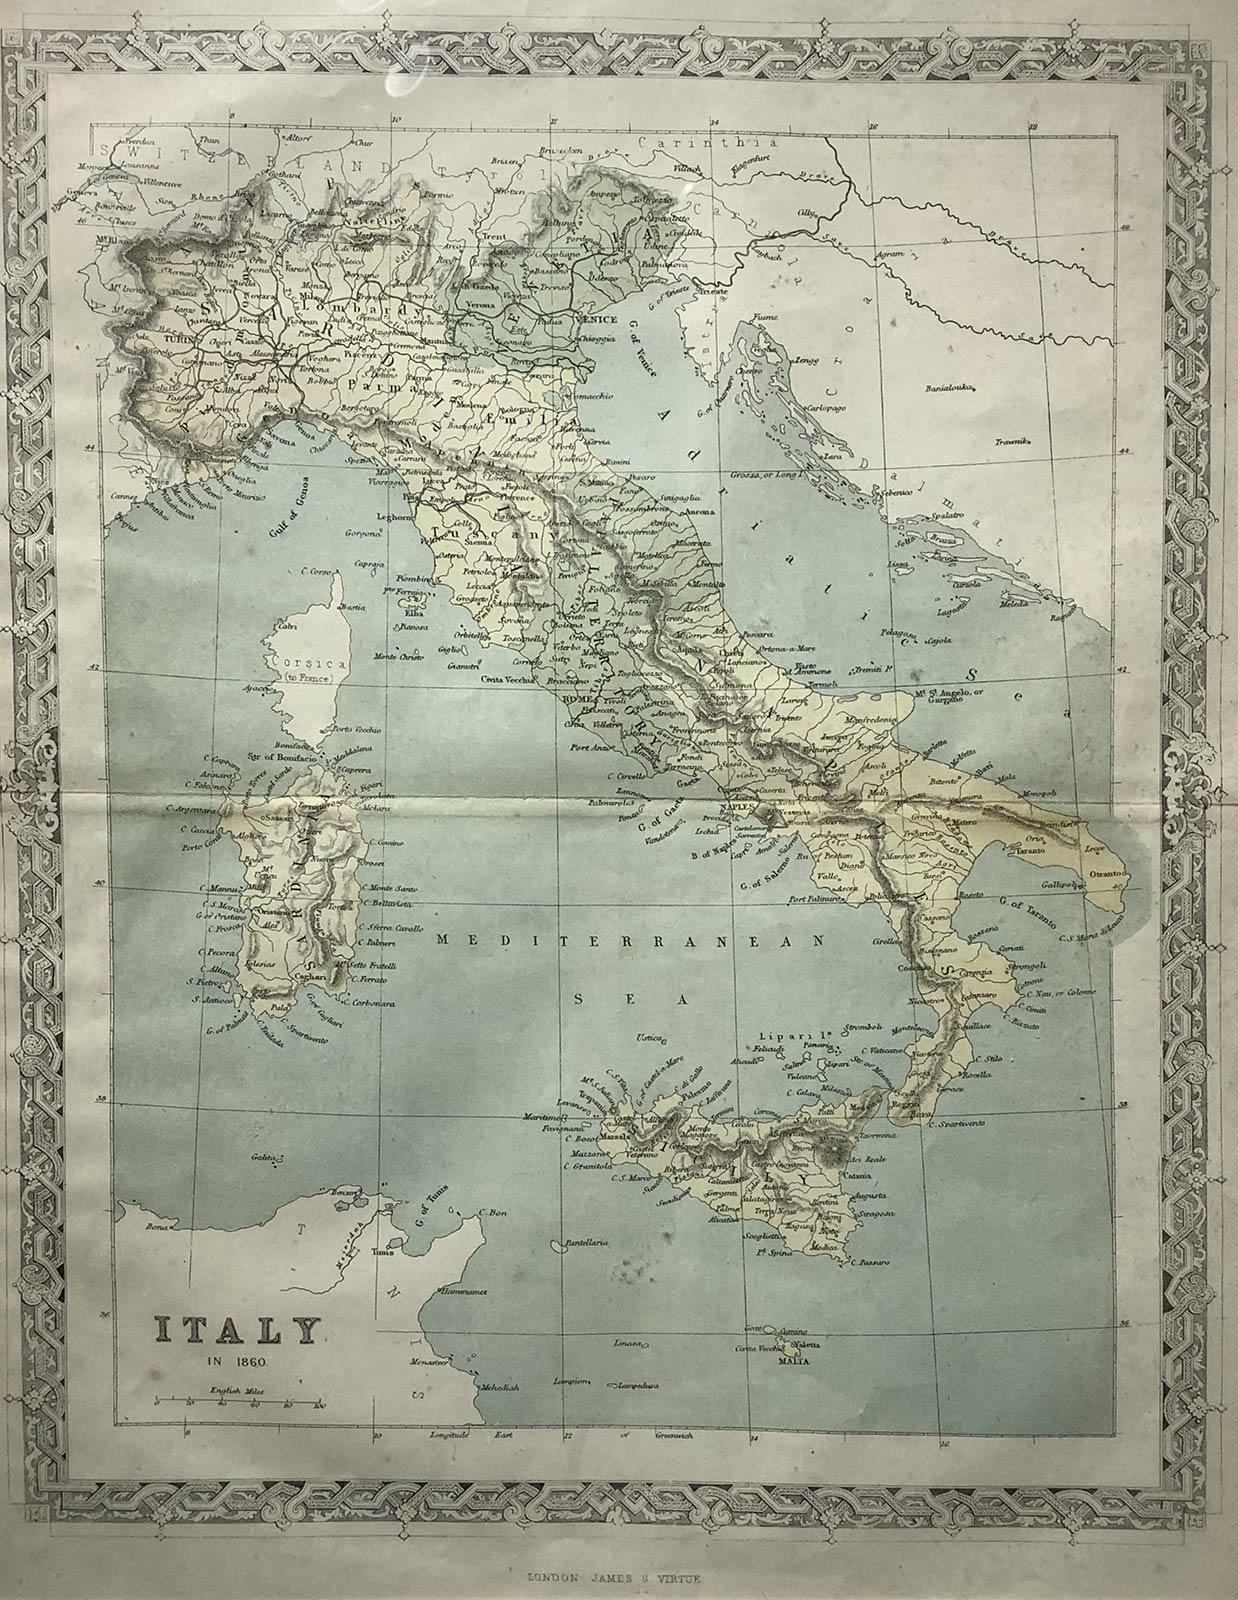 Italy, 1860 author James S. Virtue, London. Cm 34x26. With wooden frame 51x43 cm. Very good - Image 2 of 2